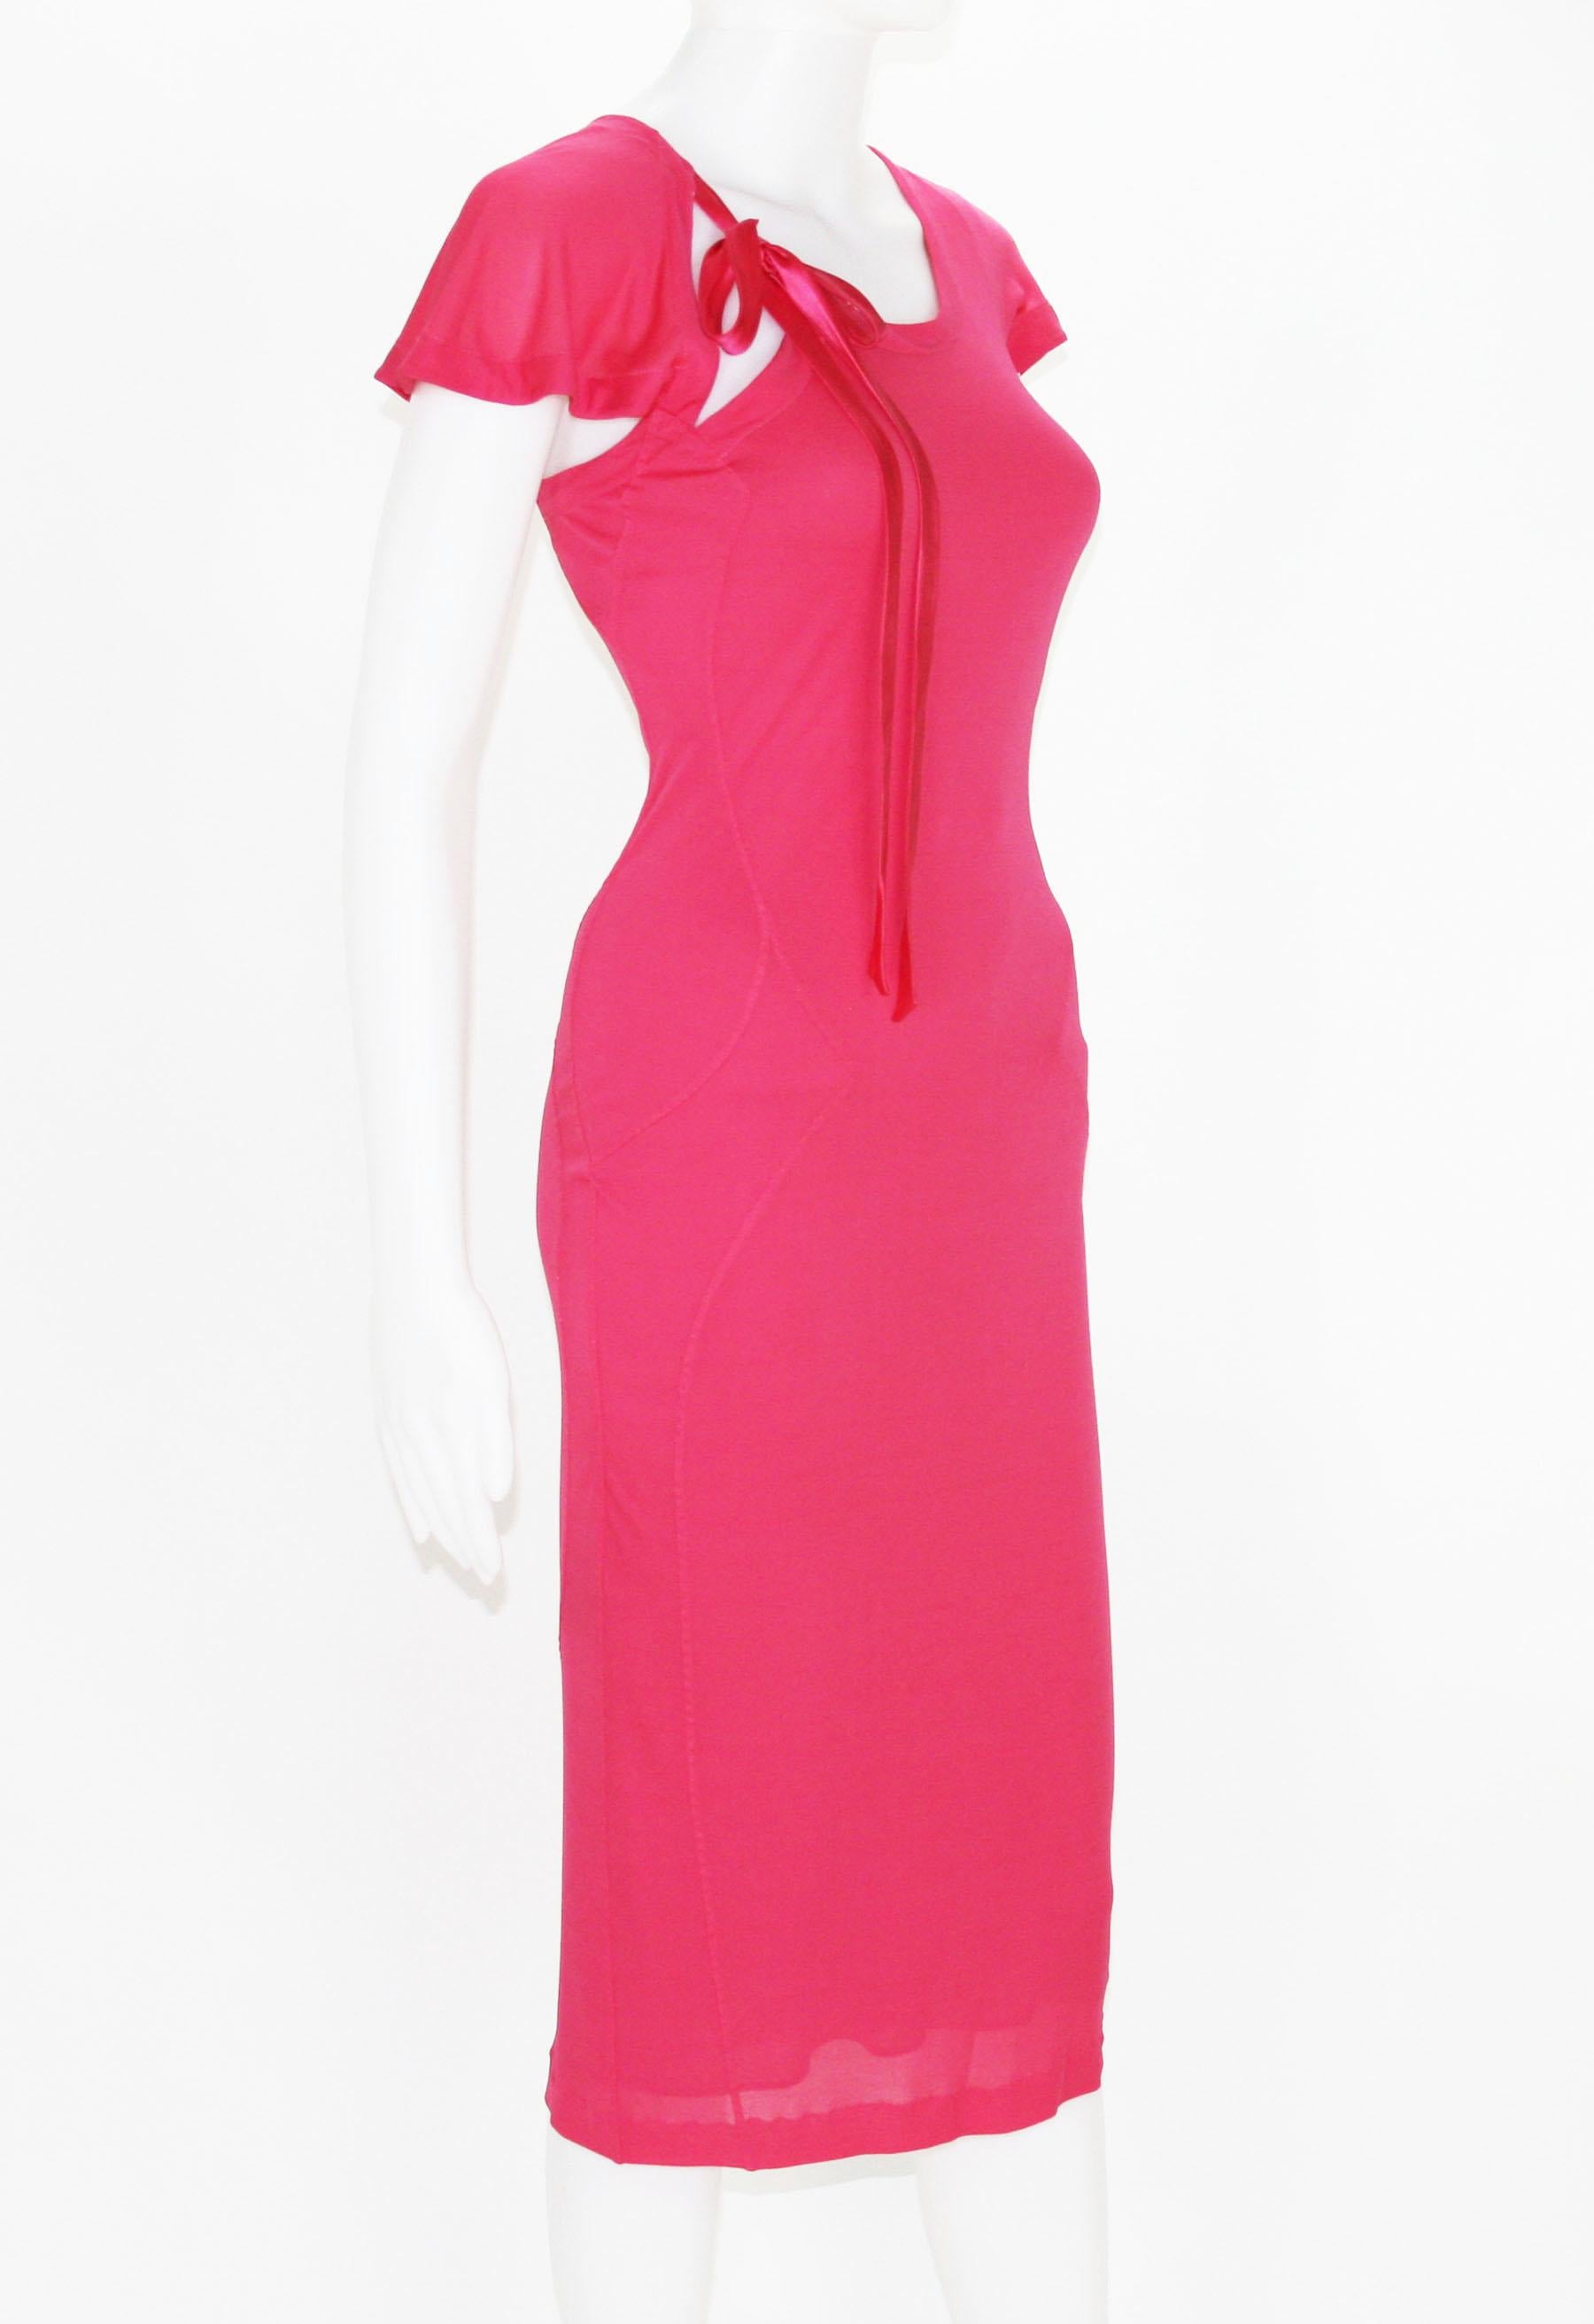 Tom Ford for Yves Saint Laurent Rive Gauche Jersey Dress
F/W 2004 Collection
Designer size - S
Pink color with shade of coral under the sun, Stretch jersey, Bow Accent at Neckline, Fully lined, Slip on style.
Measurements: length - 44 inches, bust -